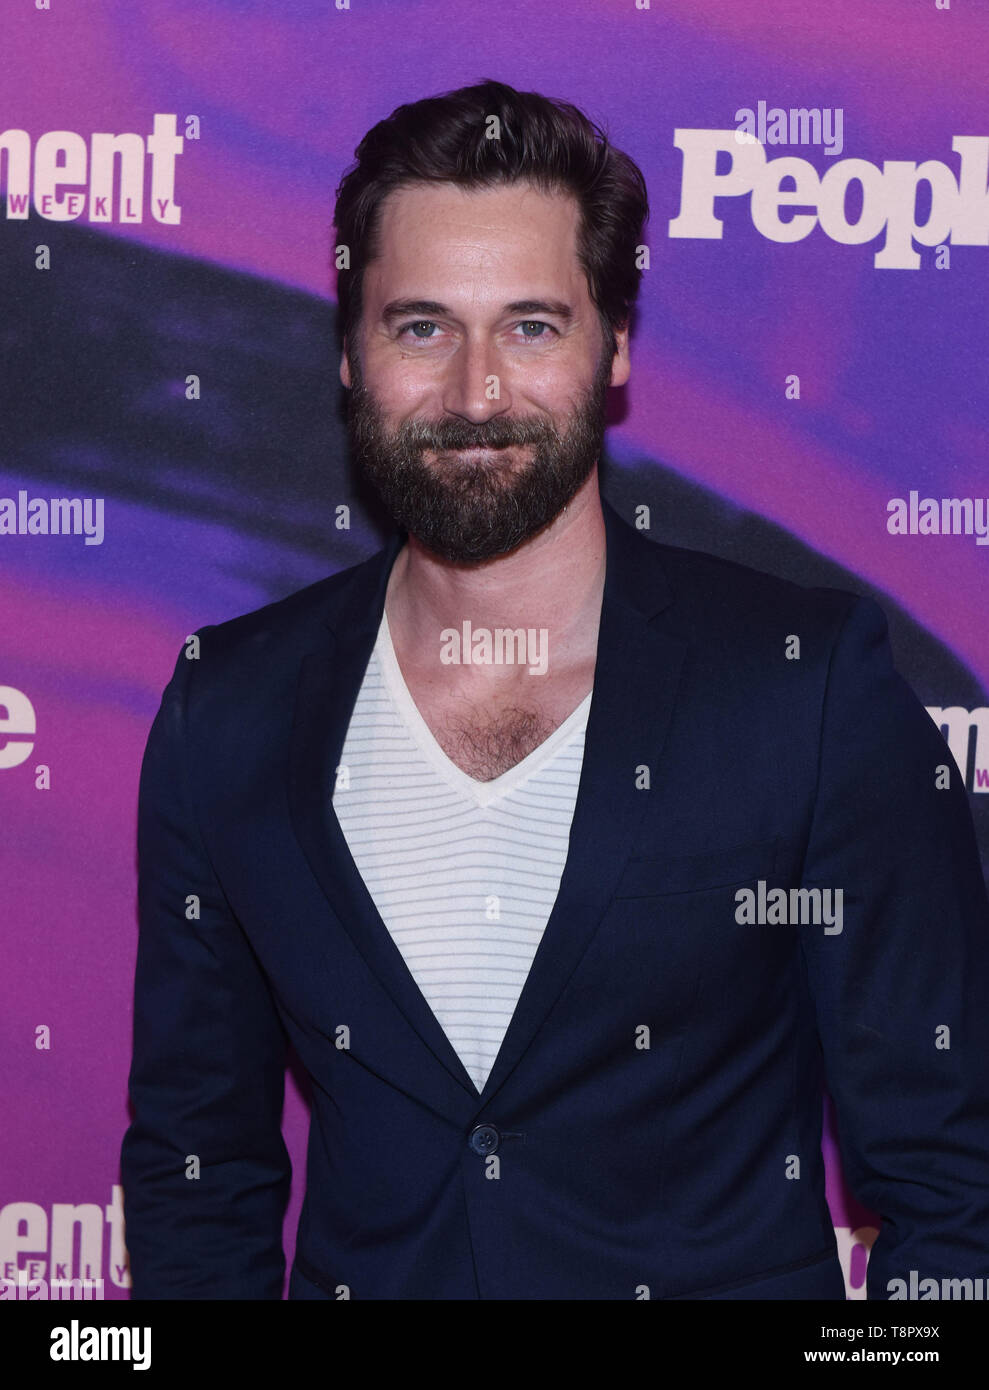 NEW YORK, NEW YORK - 13. Mai: Ryan Eggold besucht die Menschen & Entertainment Weekly 2019 Upfronts am Union Park am 13. Mai 2019 in New York City. Foto: Jeremy Smith/imageSPACE/MediaPunch Stockfoto